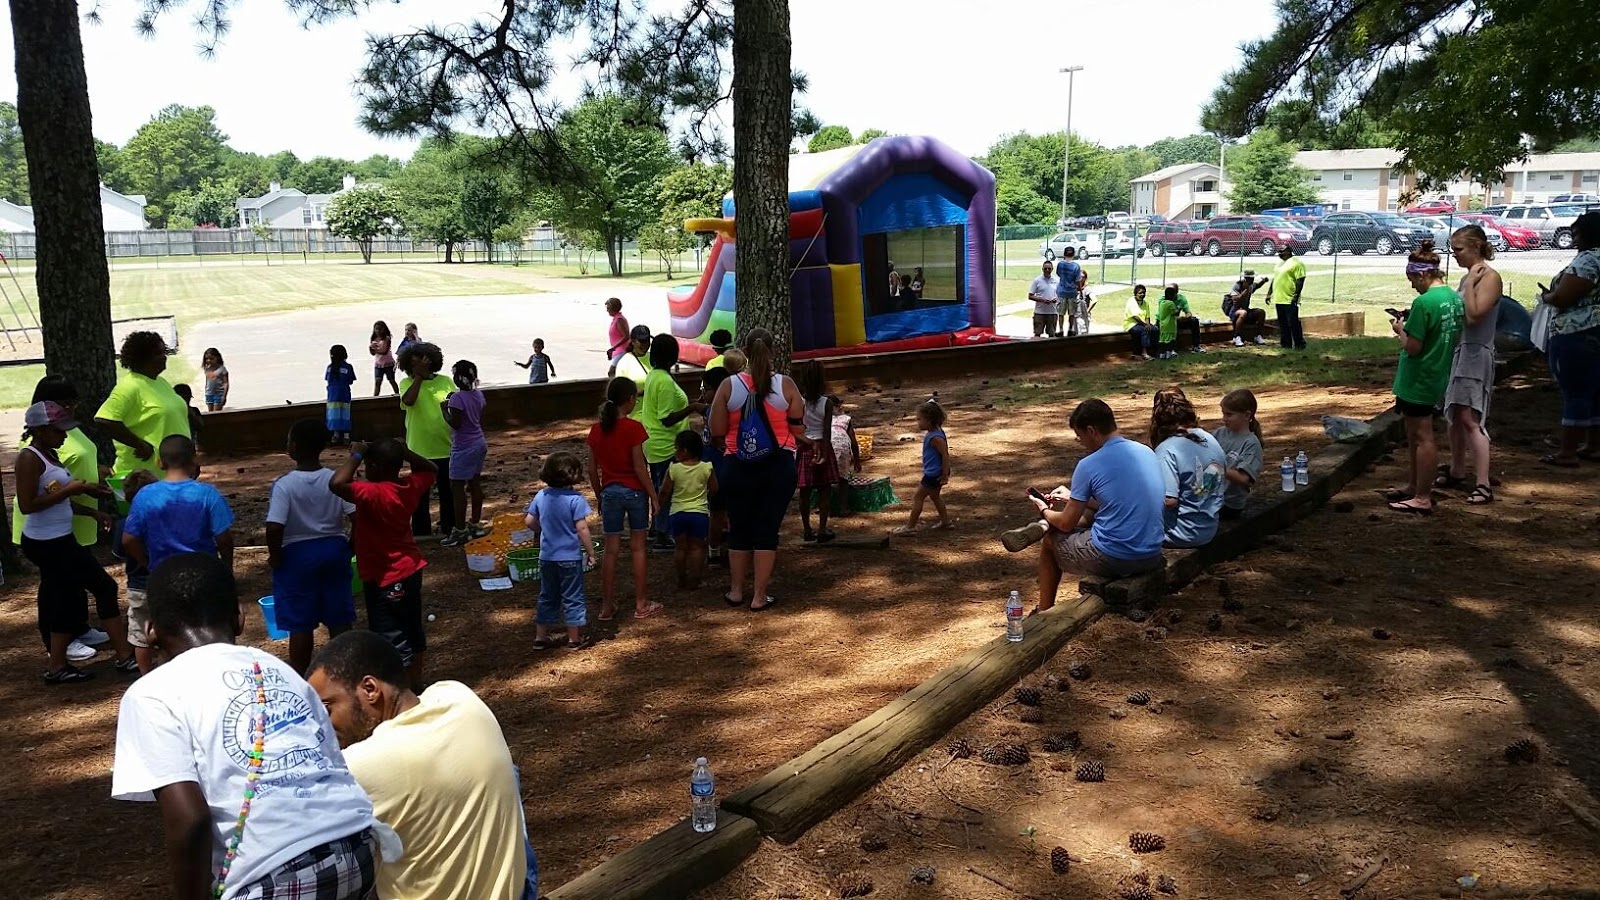 West Madison Elementary School: Welcome Back to School Community Outreach was a Blast!1600 x 900